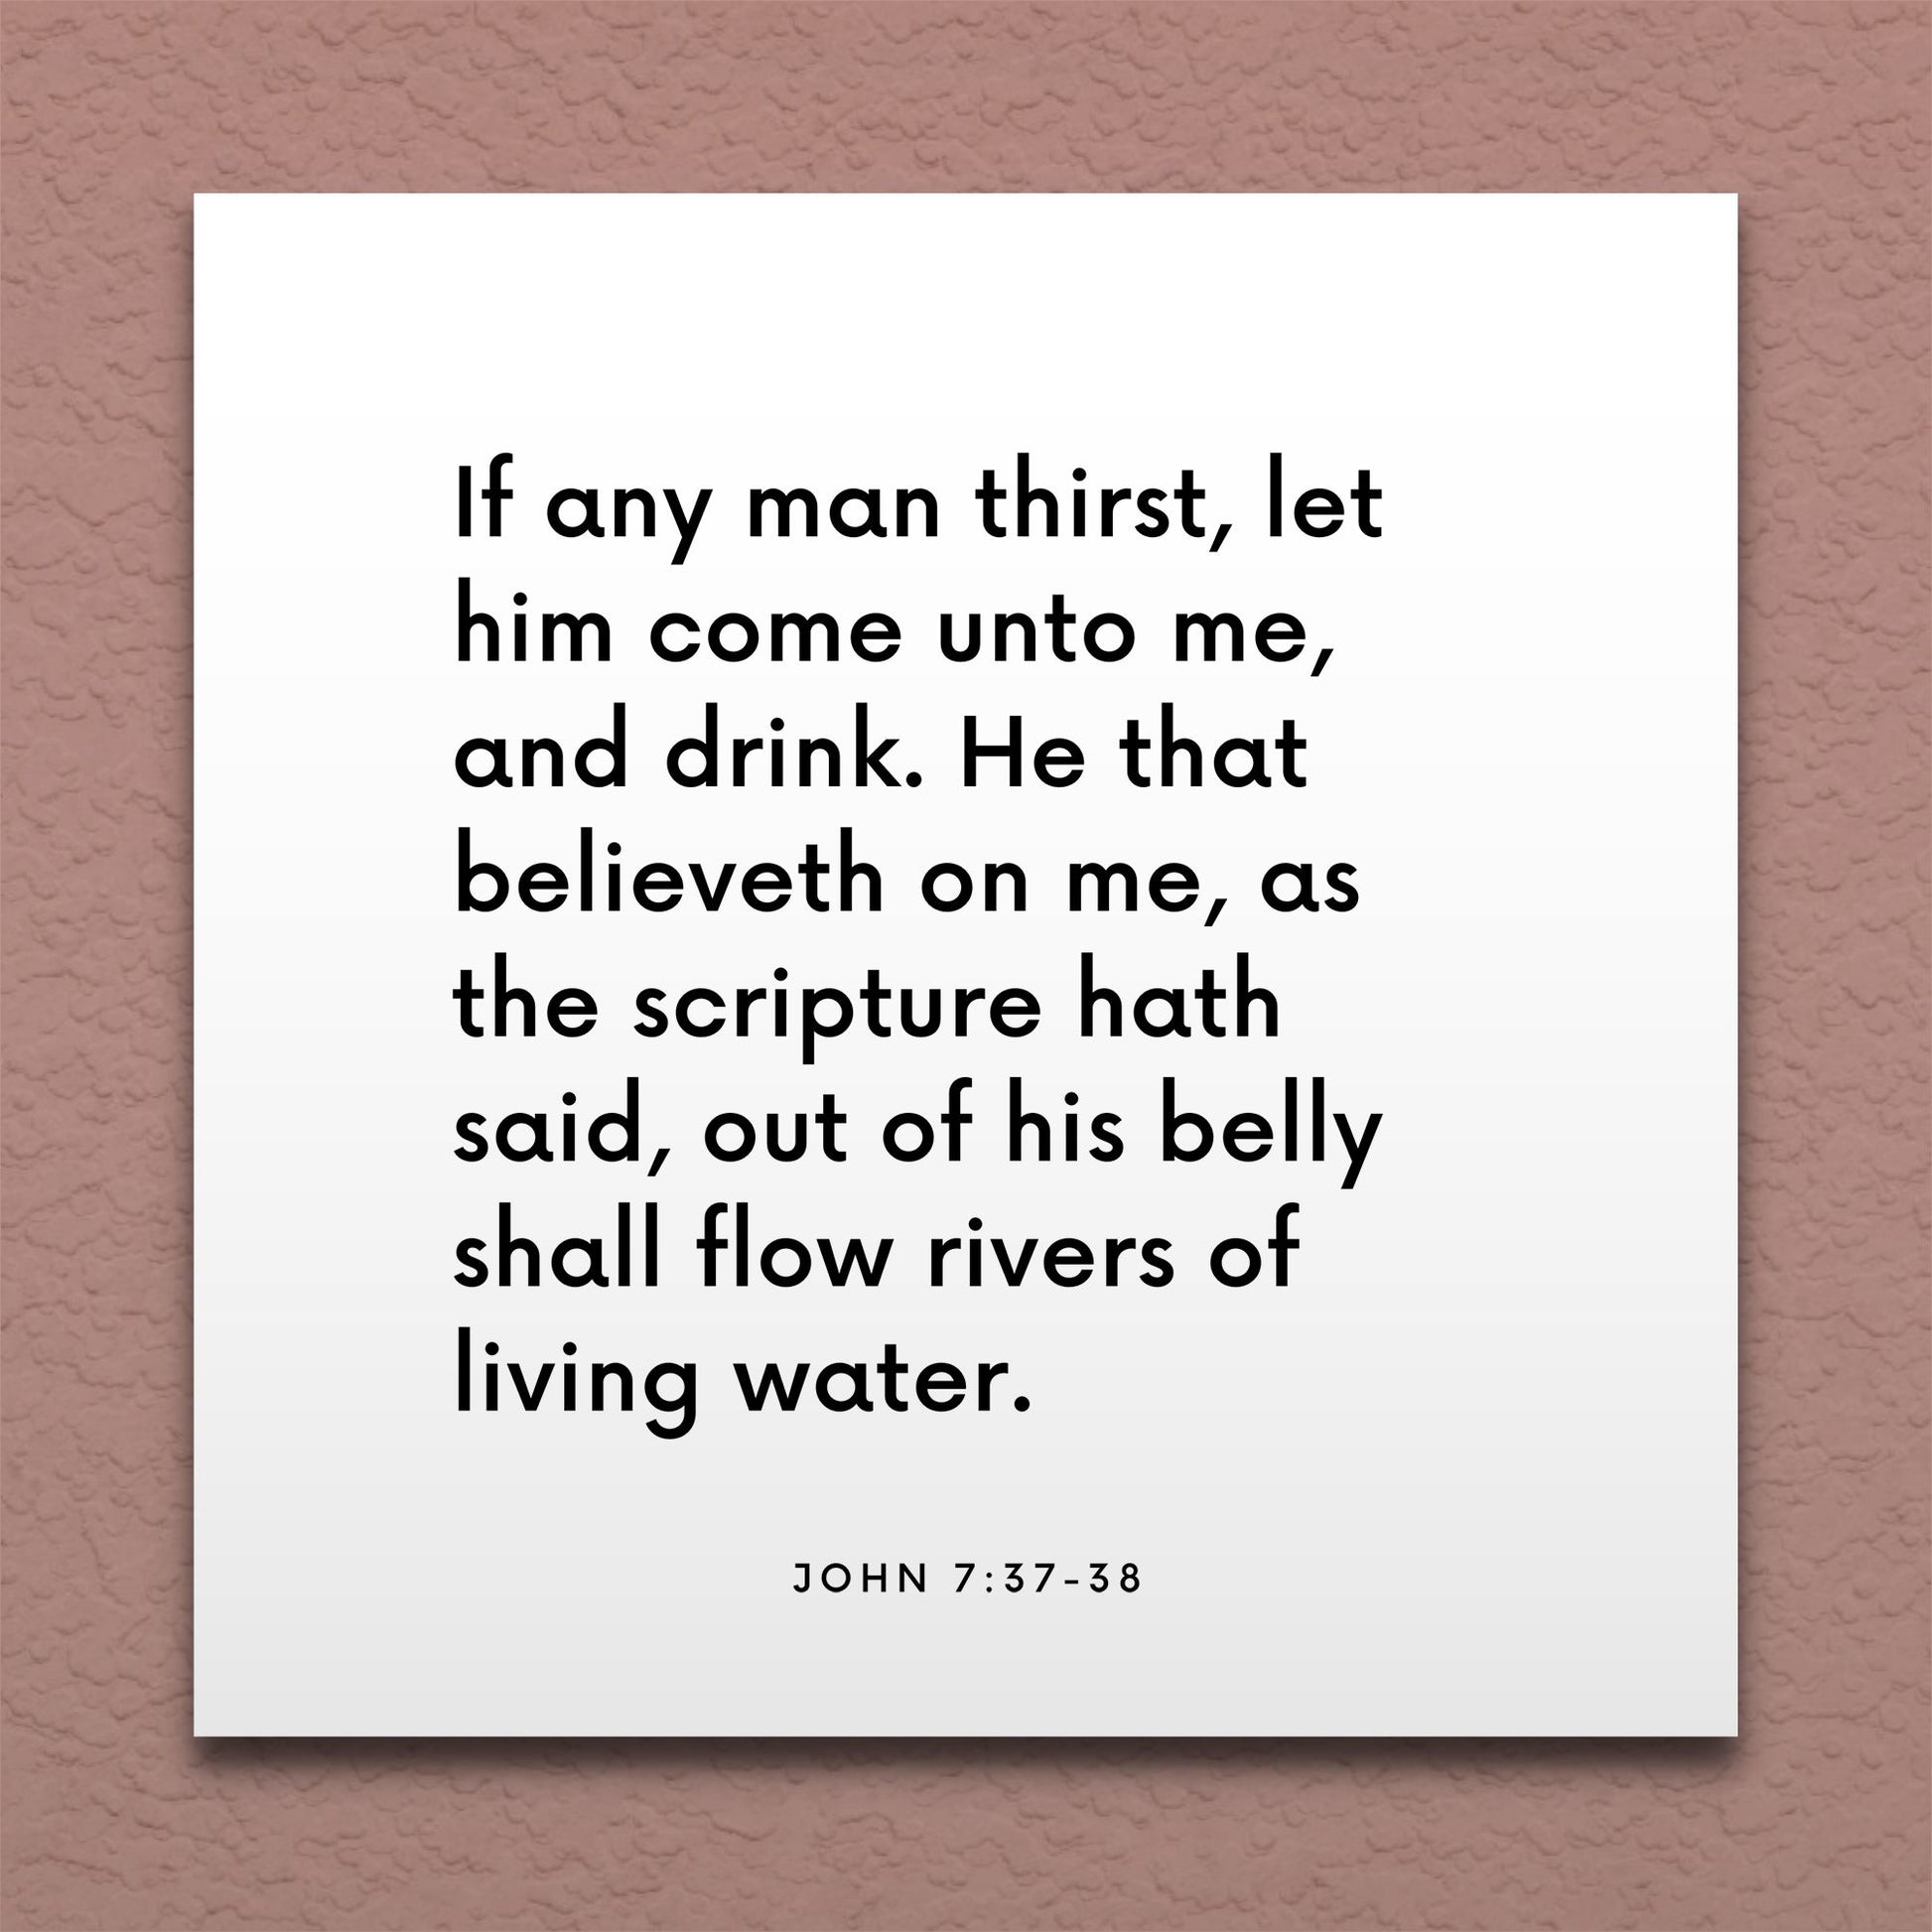 Wall-mounted scripture tile for John 7:37-38 - "If any man thirst, let him come unto me, and drink"